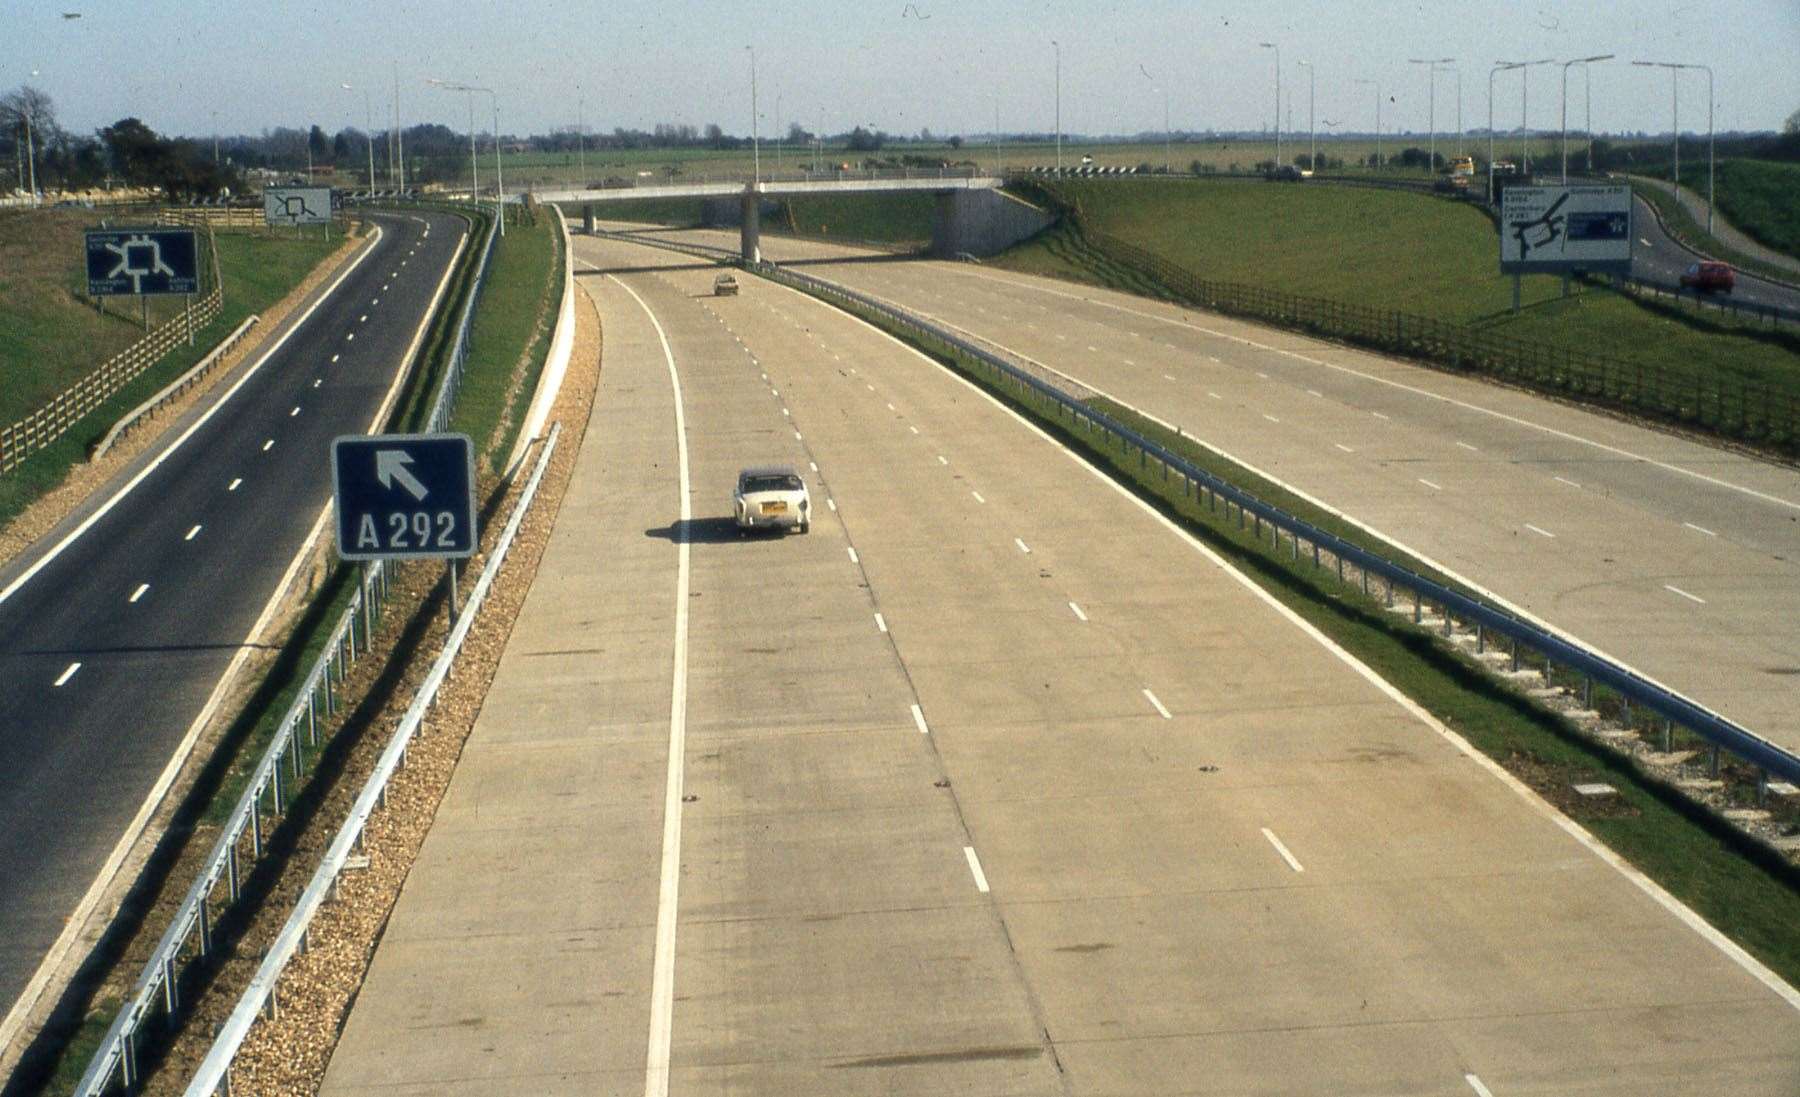 The M20 at Willesborough and Junction 10 shortly after completion in 1981